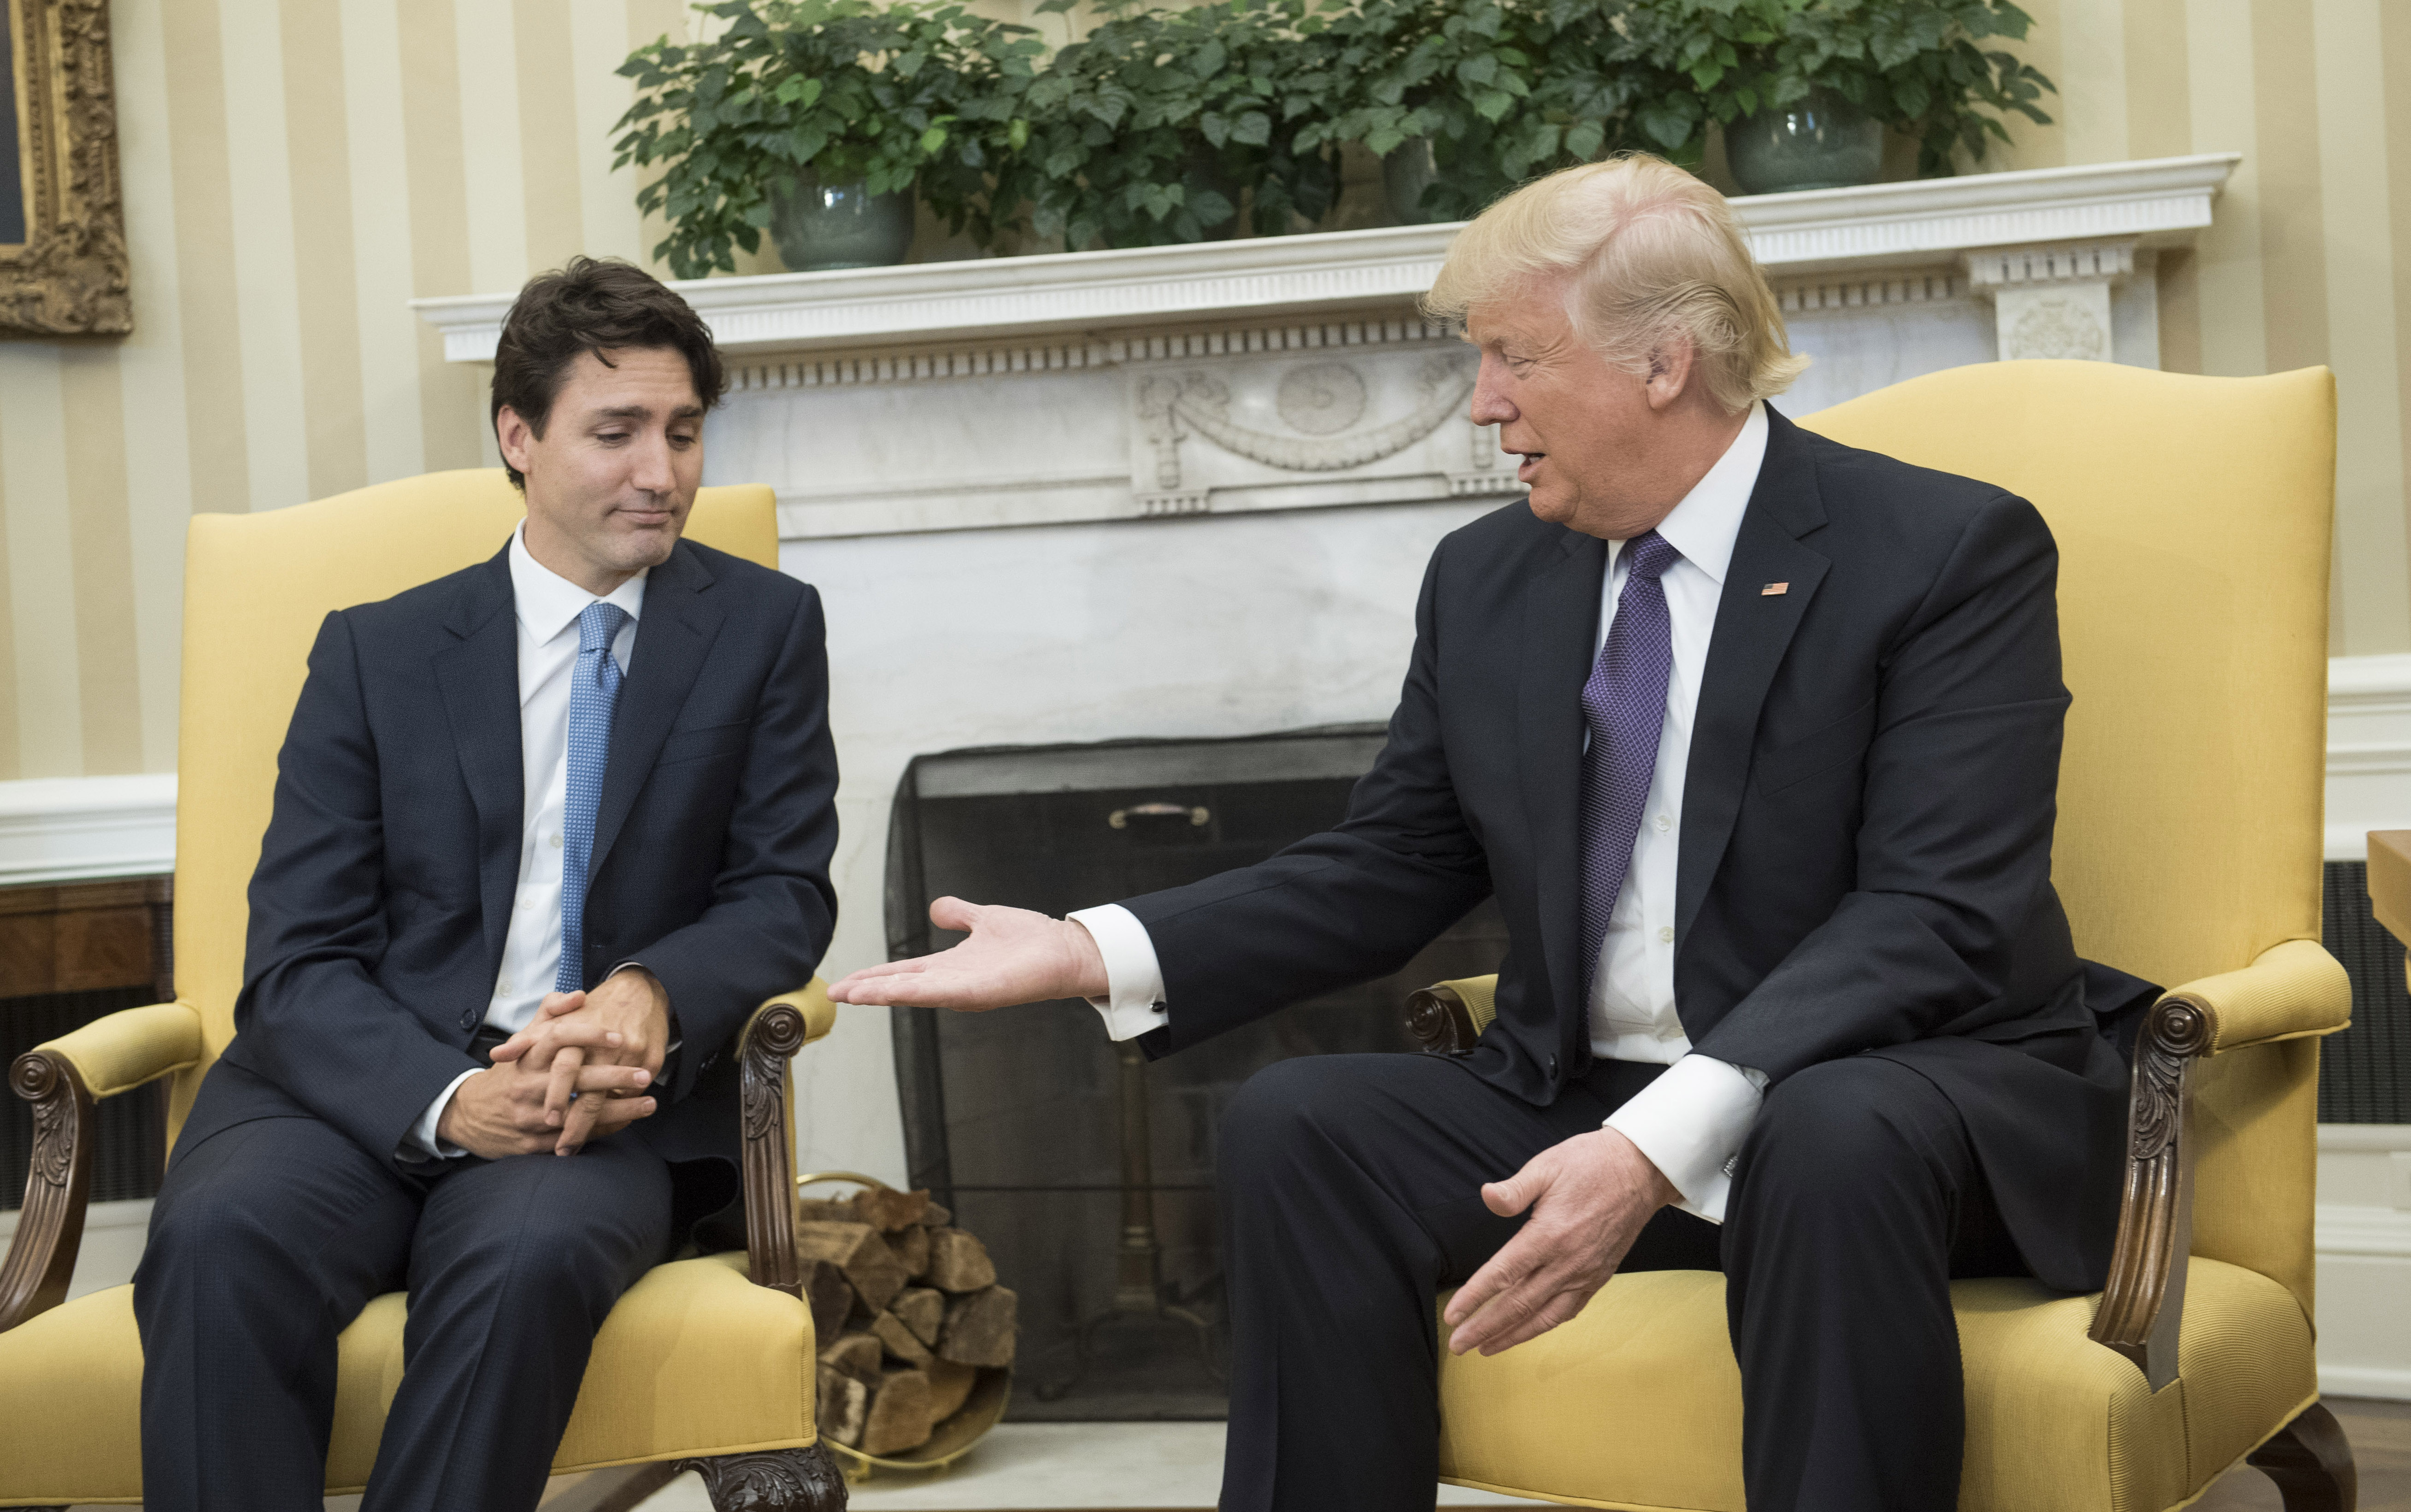 WASHINGTON, DC - FEBRUARY 13: (AFP OUT) U.S. President Donald Trump (R) extends his hand to Prime Minister Justin Trudeau of Canada during a meeting in the Oval Office at the White House on February 13, 2017 in Washington, D.C. This is the first time the two leaders are meeting at the White House. (Photo by Kevin Dietsch-Pool/Getty Images)